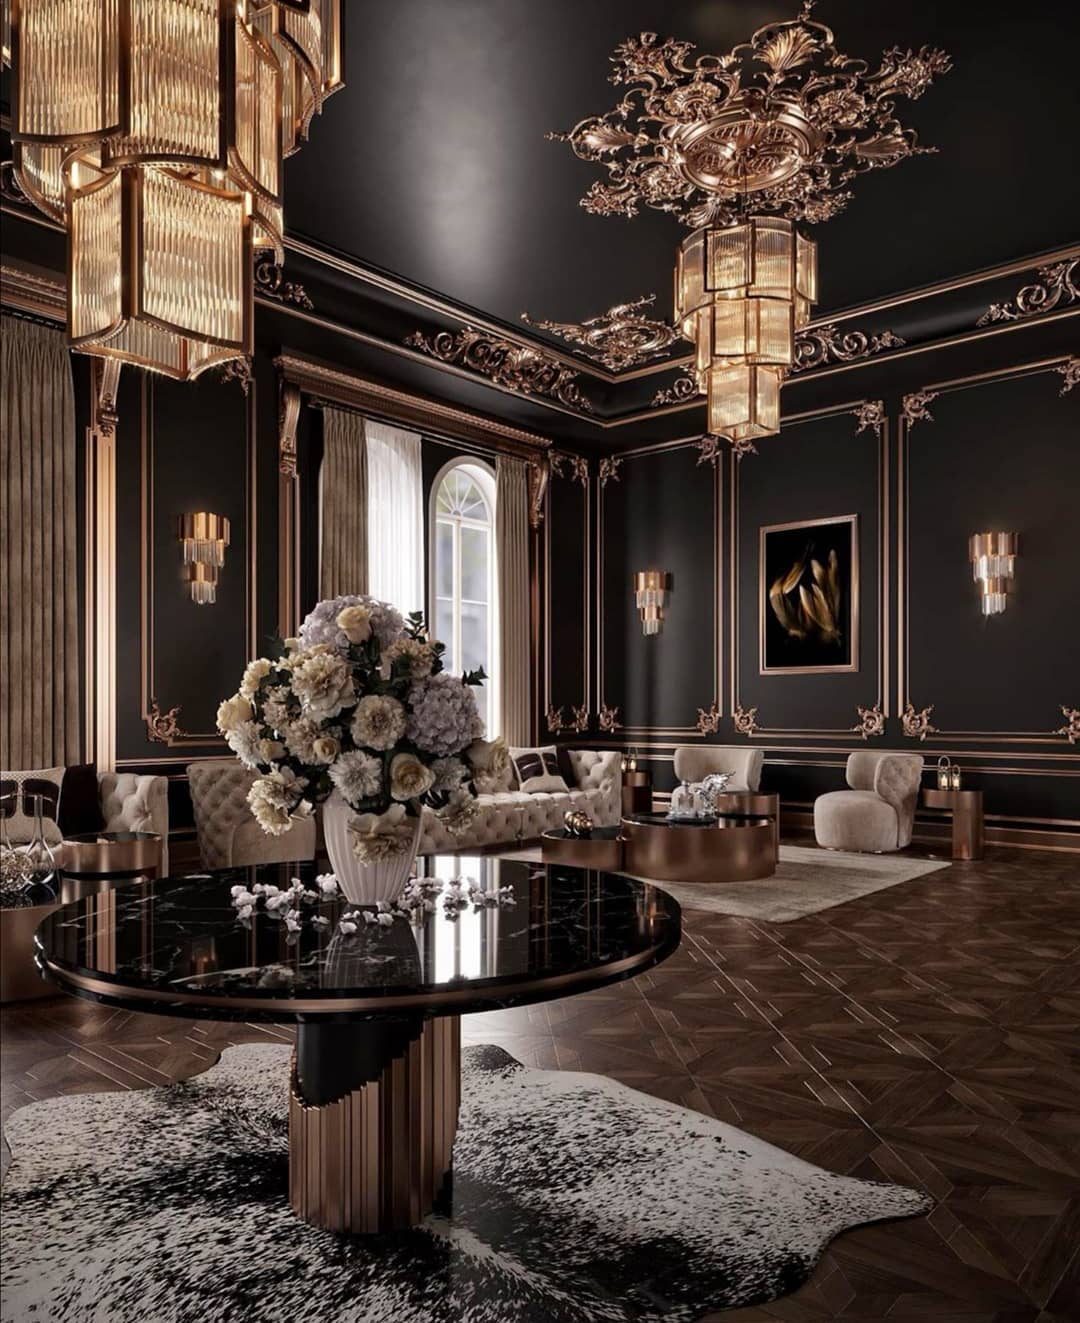 The Queen’s Gambit: 4 interior design projects for fans of the show